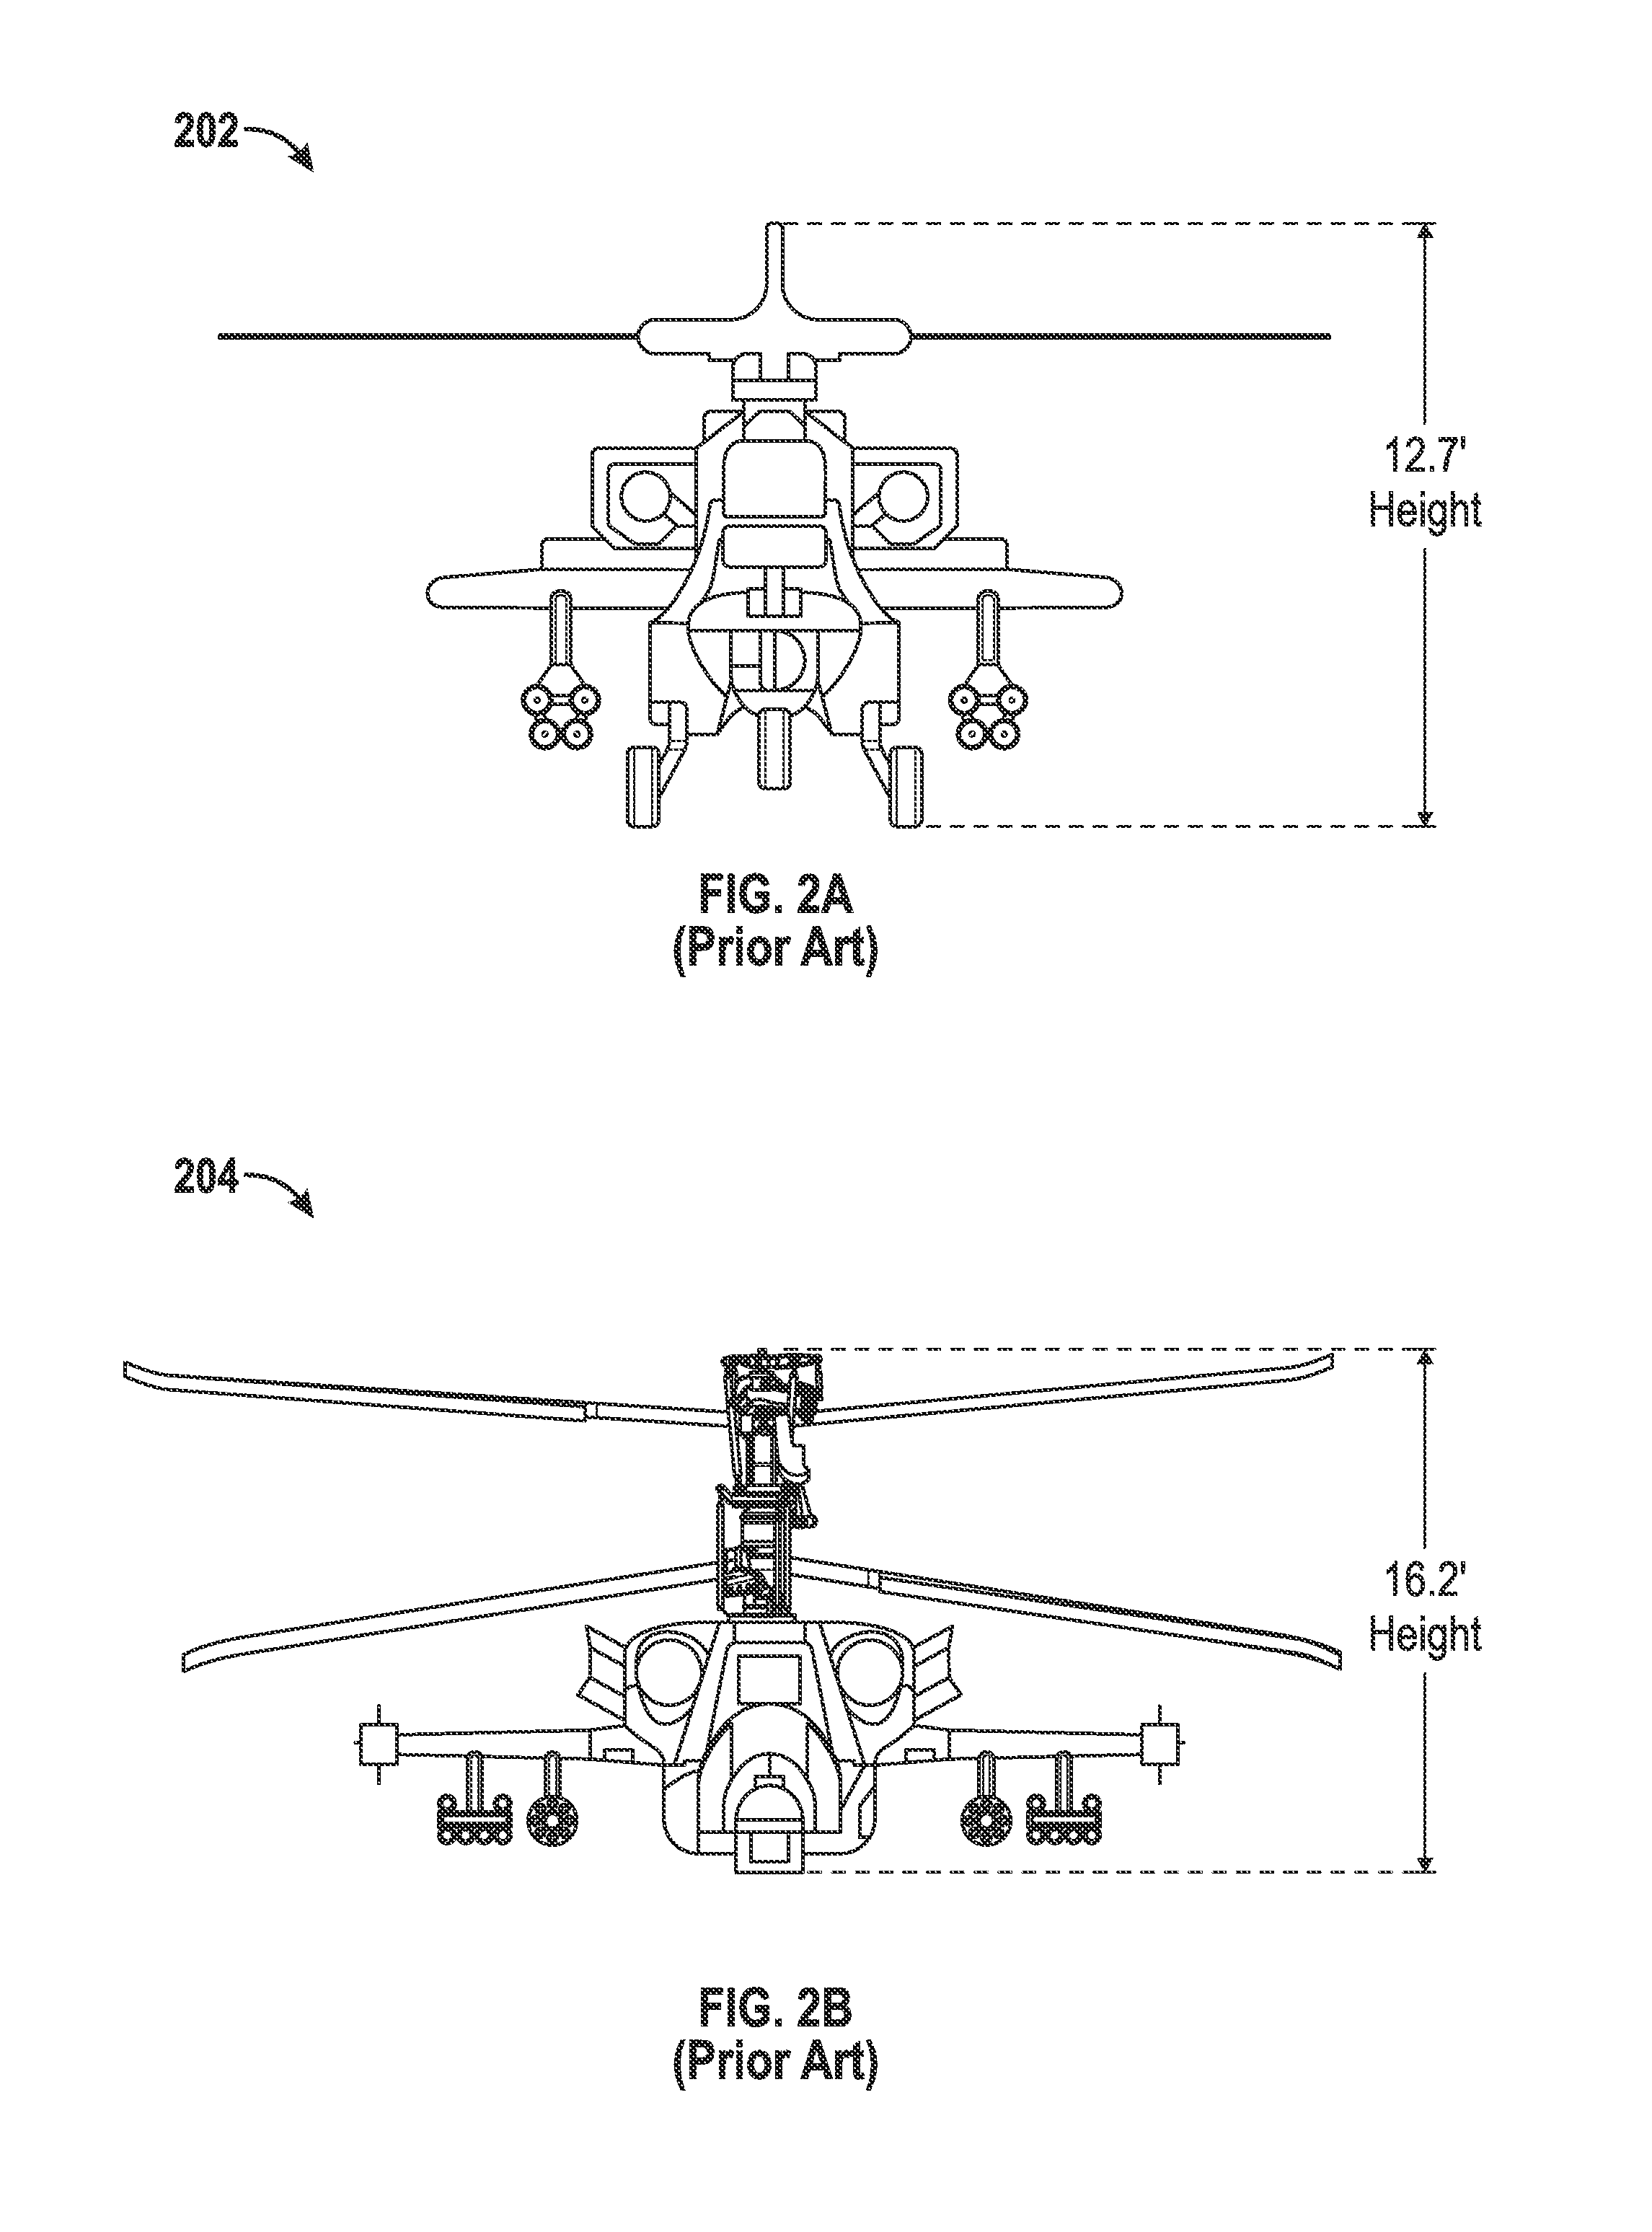 Helicopter rotor load reduction and tip clearance control